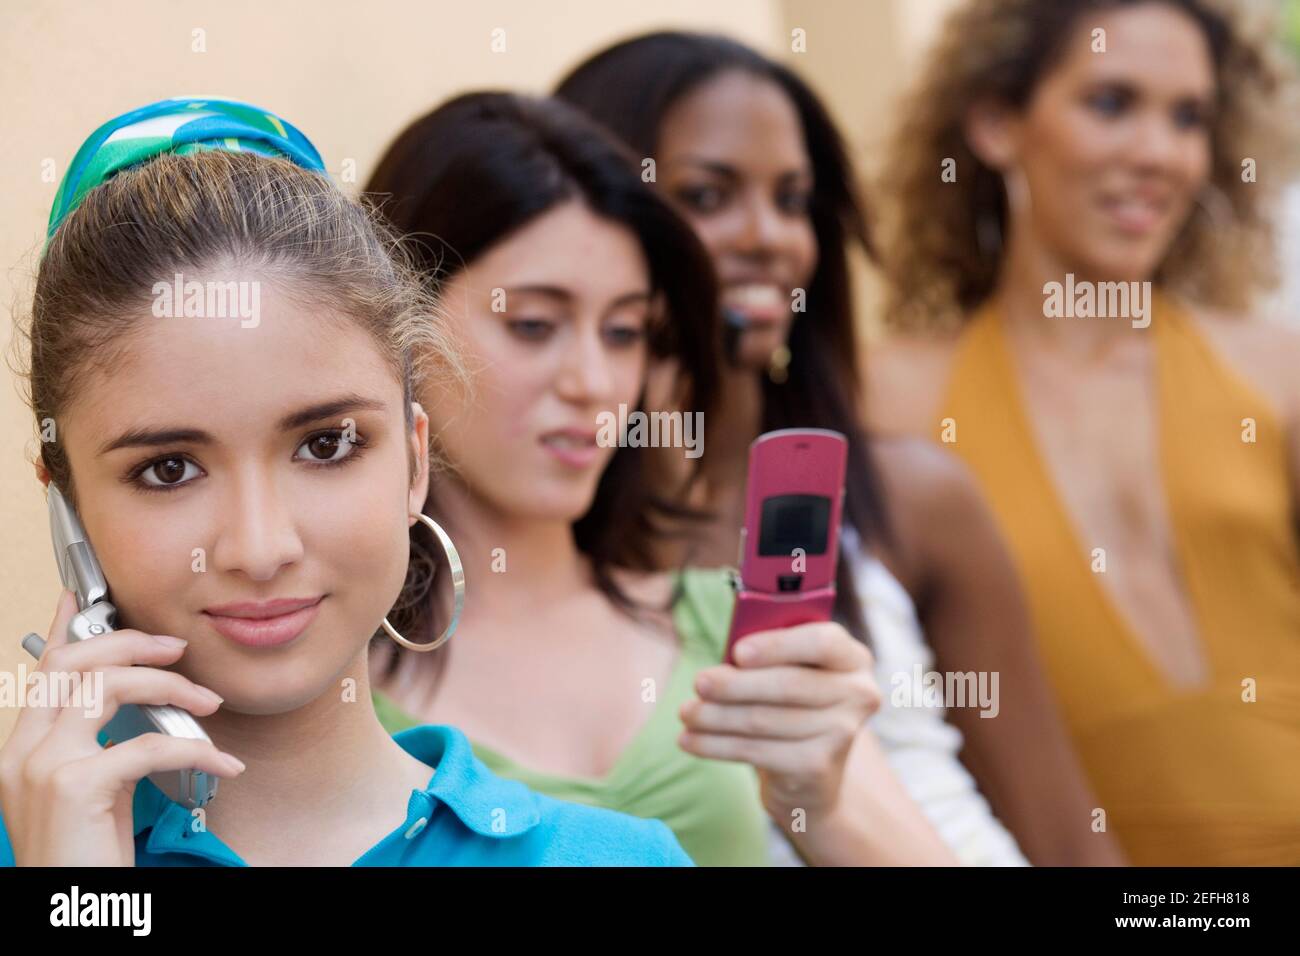 Portrait of a teenage girl talking on a mobile phone with three teenage girls behind her Stock Photo